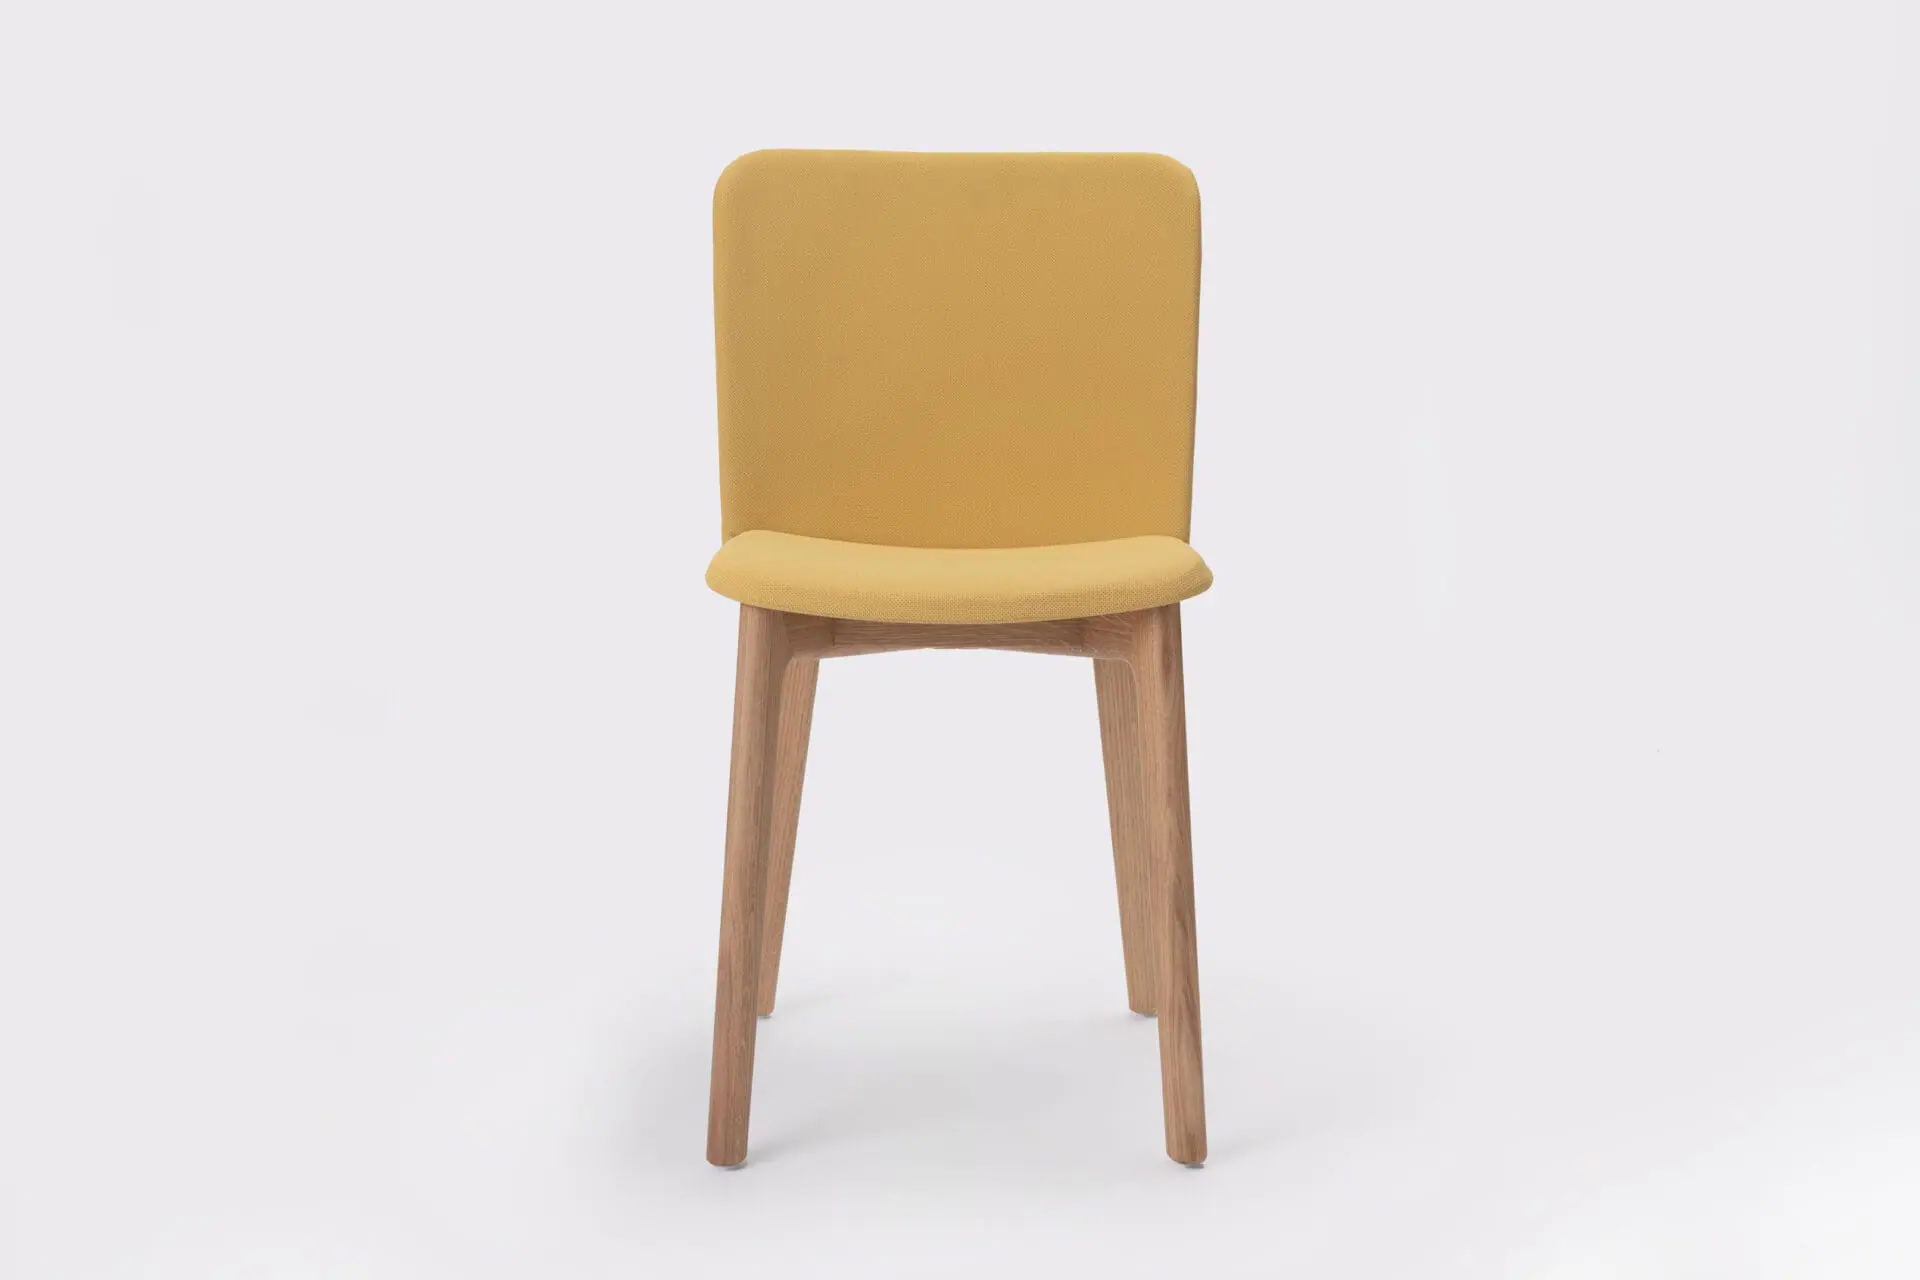 supra_chair_wood_upholstered_contour-1